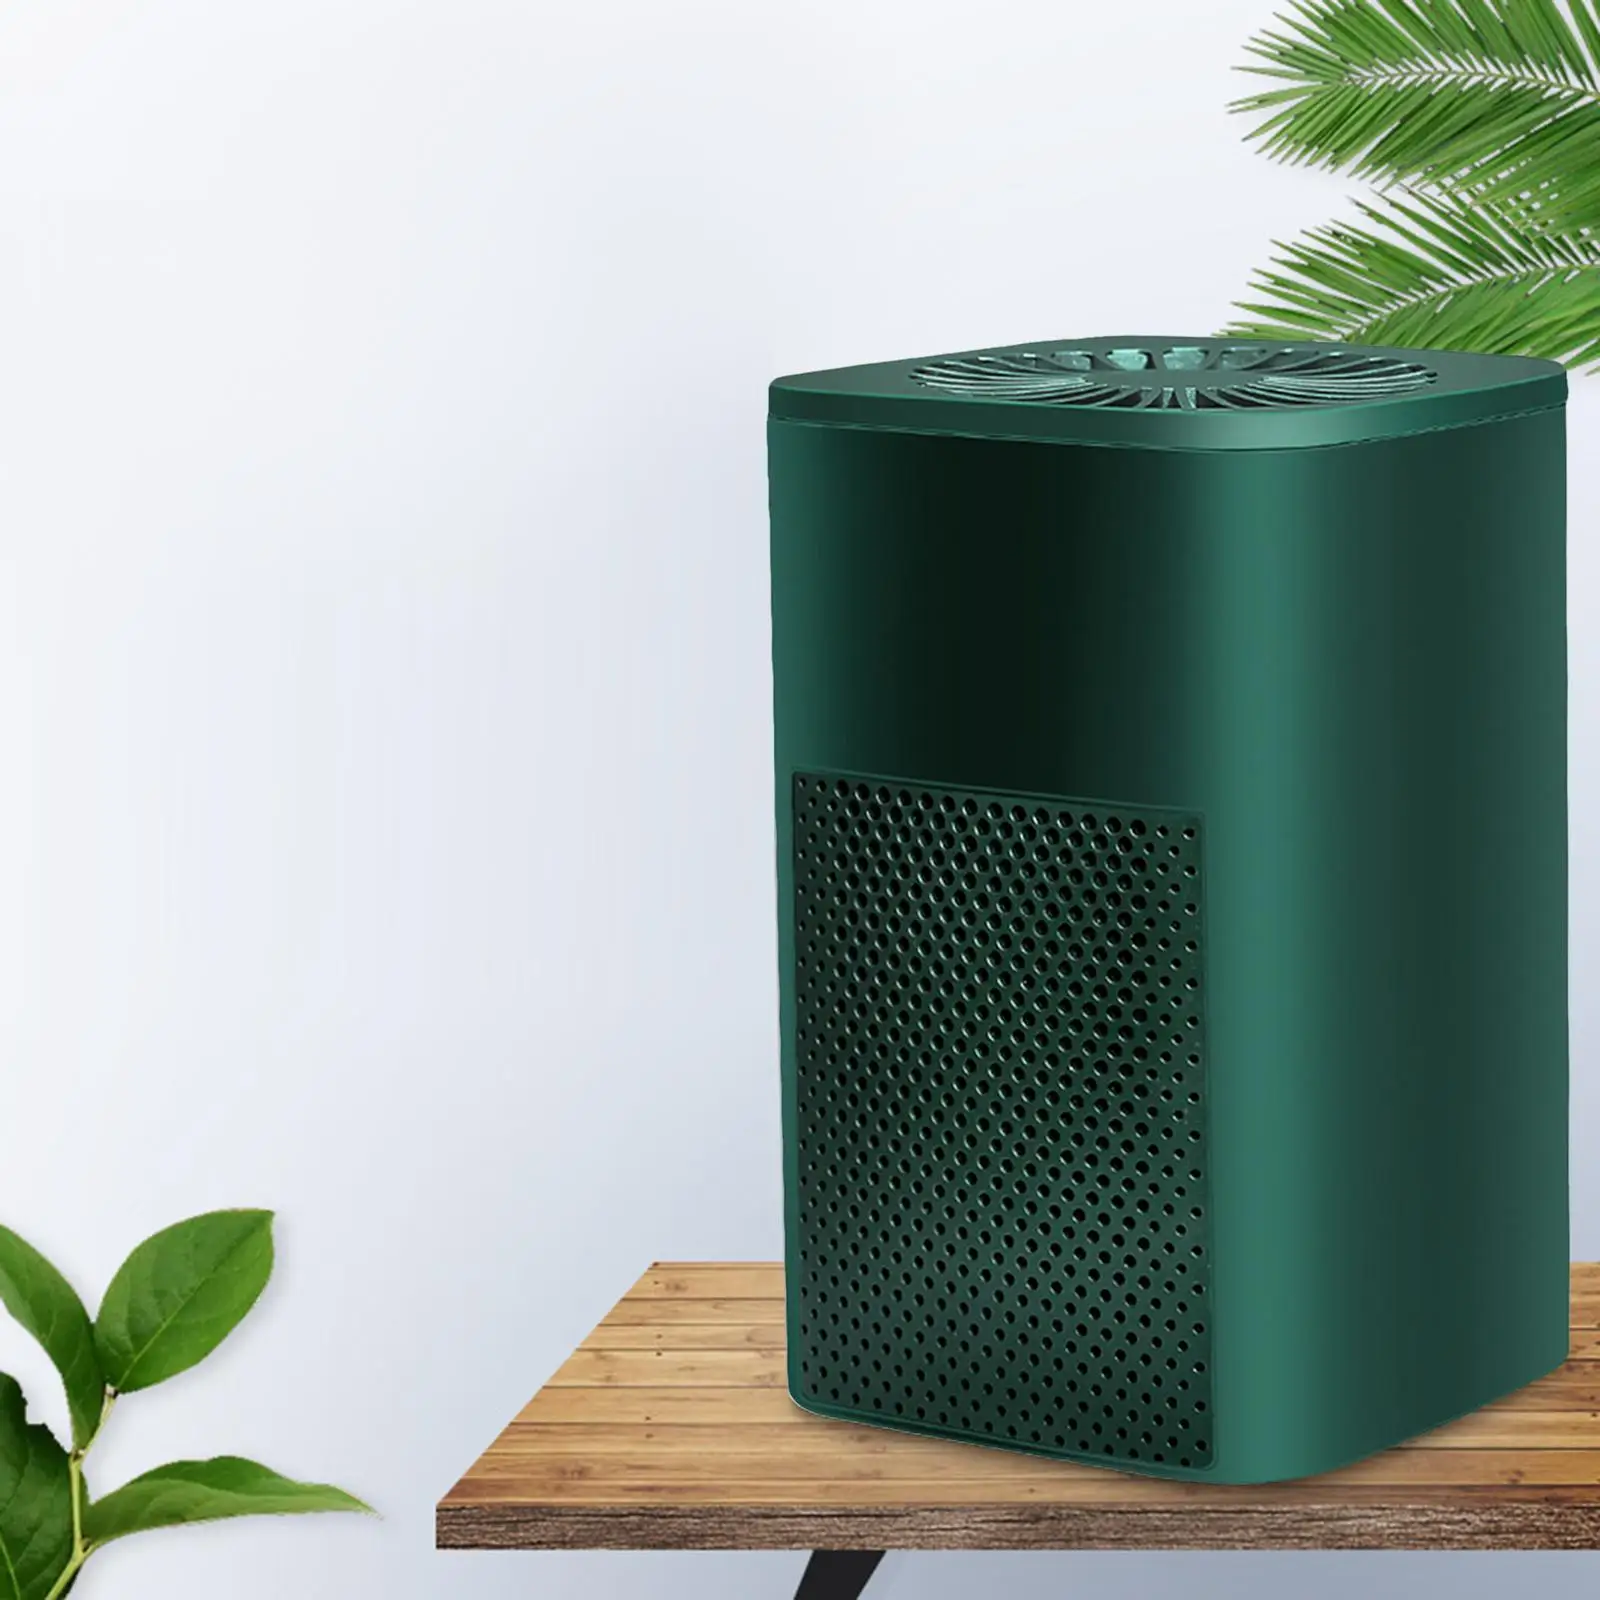 Portable Mini Air Purifier 2 Layer Activated Carbon Quiet Office PM2.5 Monitor Air Cleaner Removes CO2 Odor Pet Allergies Dust